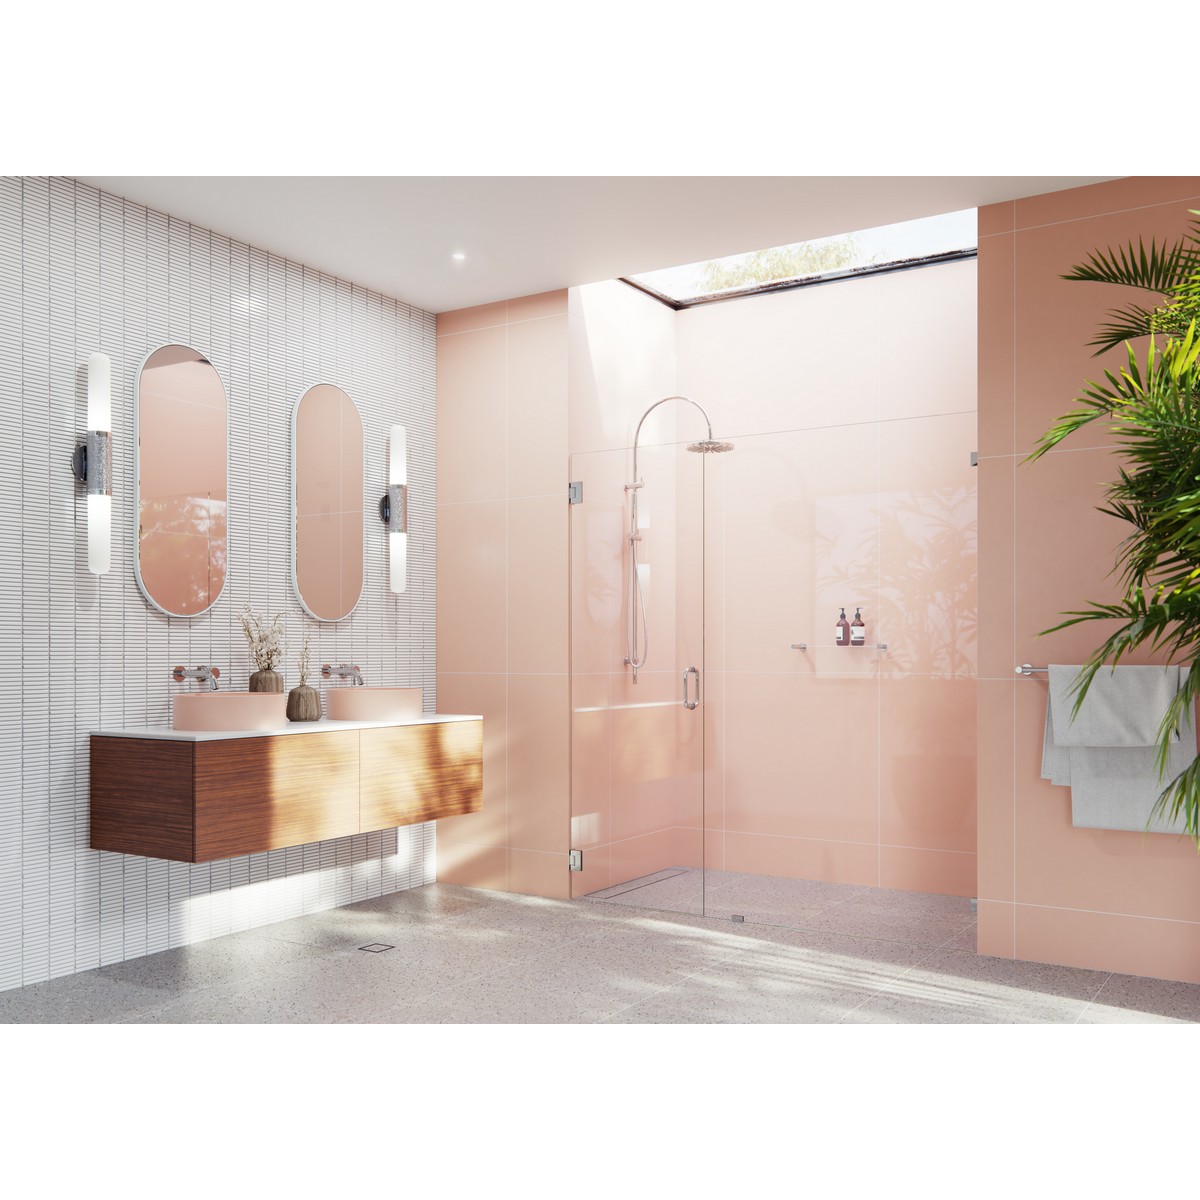 GLASS WAREHOUSE GW-WH-68.25 ILLUME 68 1/4 W X 78 H WALL HINGED FULLY FRAMELESS GLASS SHOWER ENCLOSURE